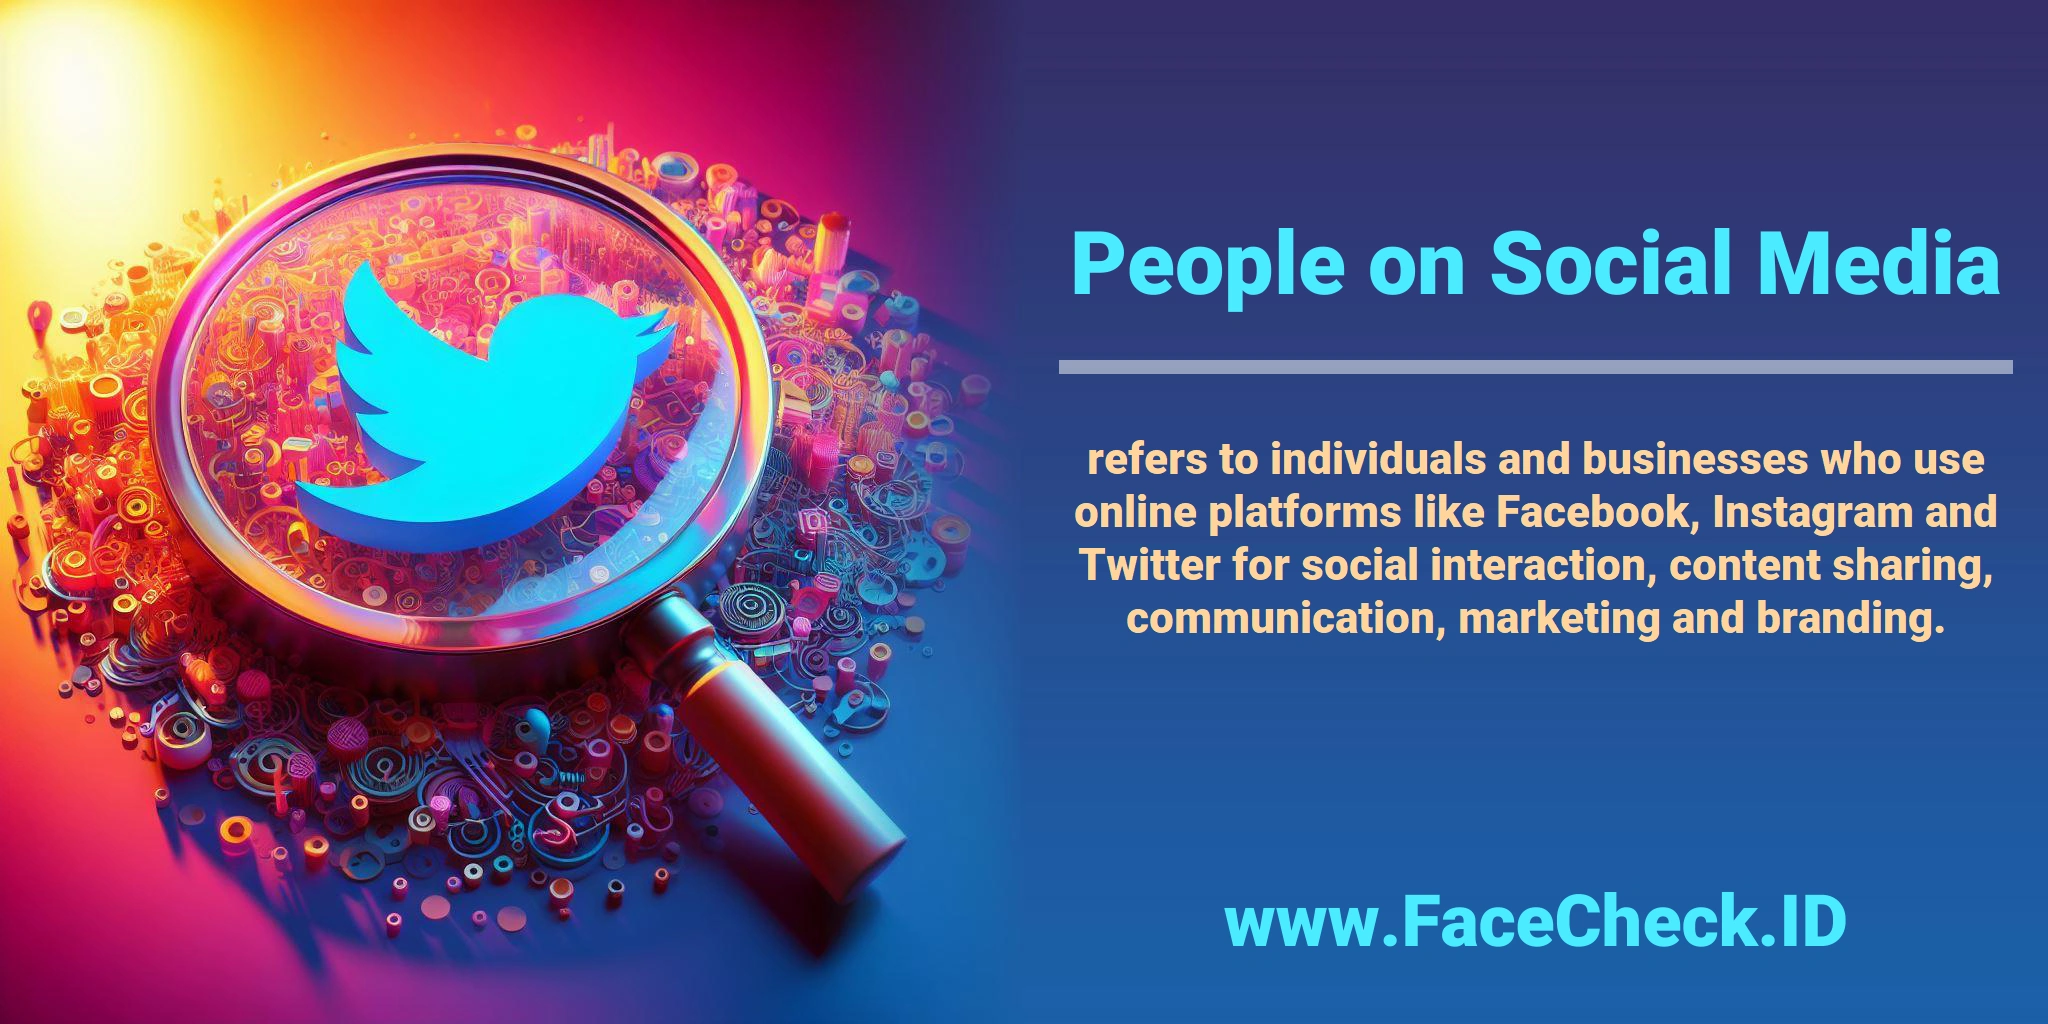 <b>People on Social Media</b> refers to individuals and businesses who use online platforms like Facebook, Instagram and Twitter for social interaction, content sharing, communication, marketing and branding.